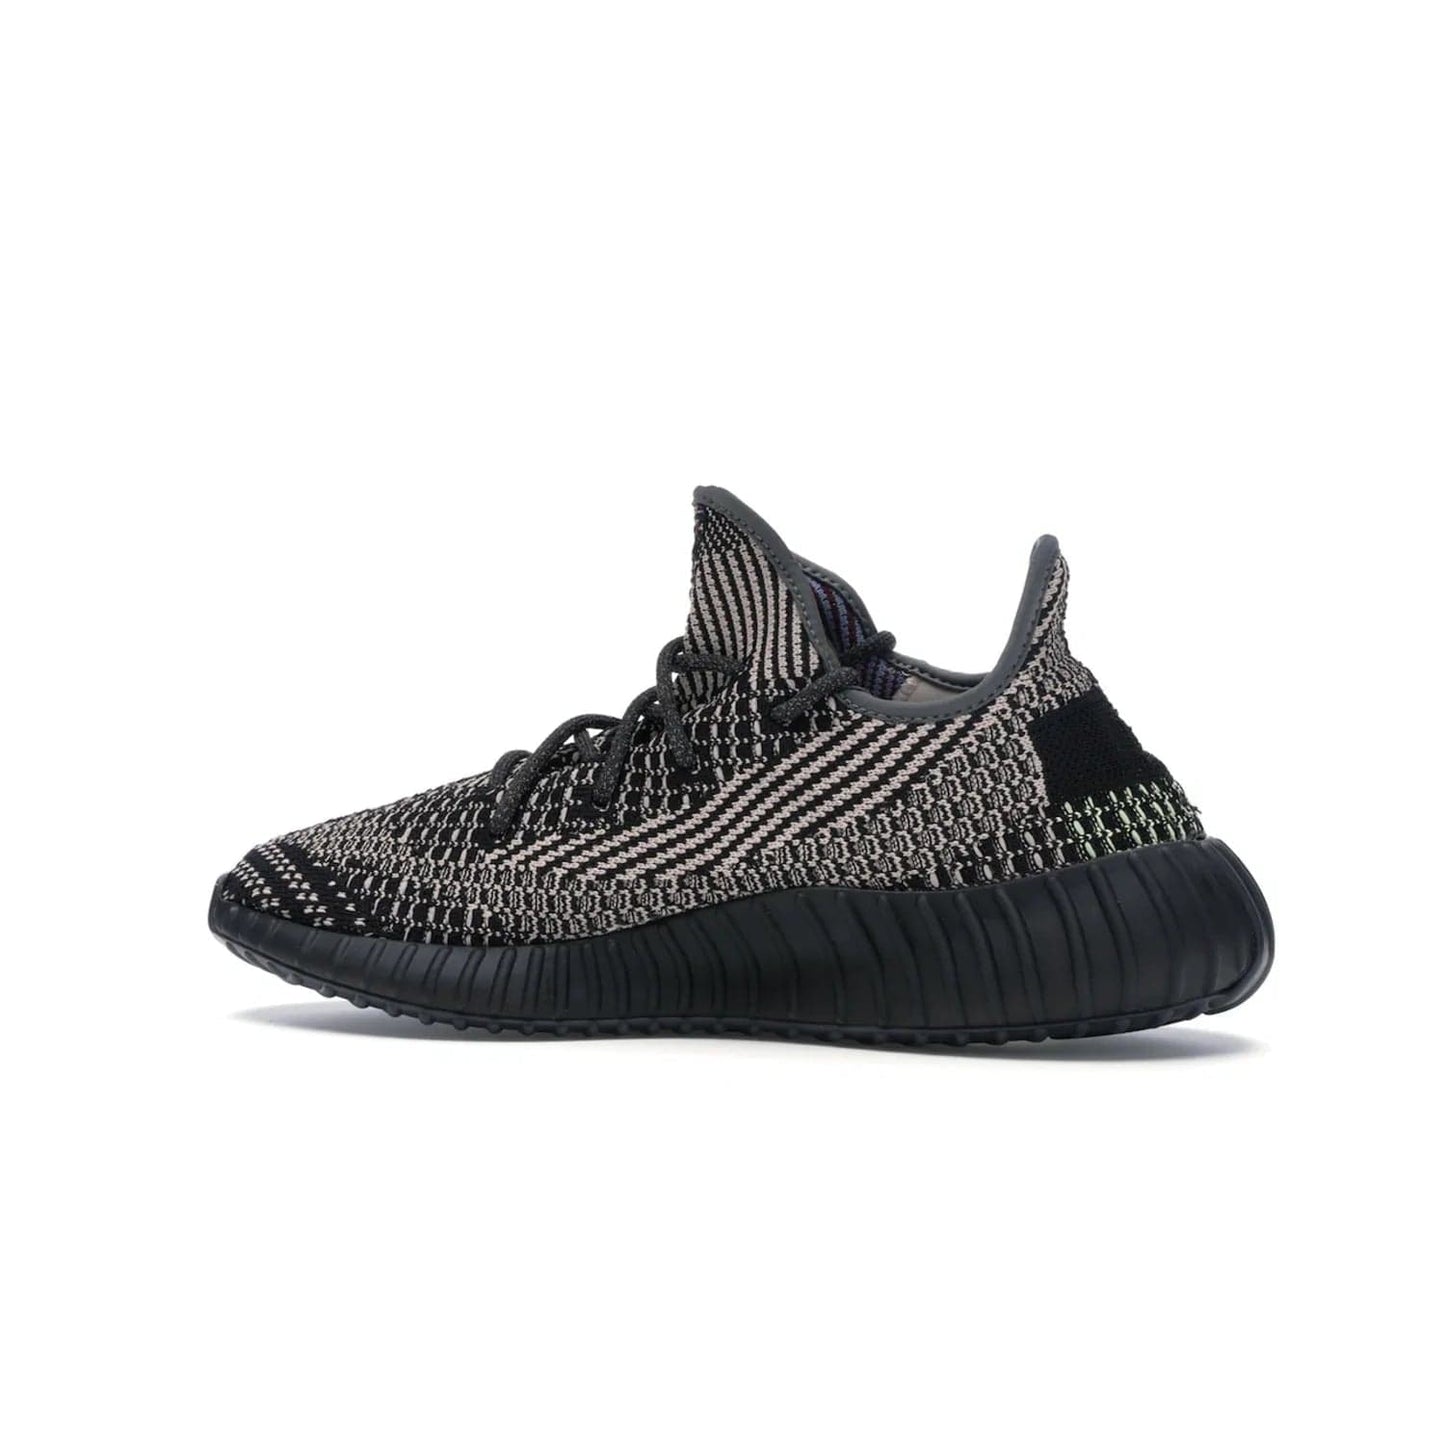 adidas Yeezy Boost 350 V2 Yecheil (Non-Reflective) - Image 21 - Only at www.BallersClubKickz.com - Make a statement with the eye-catching adidas Yeezy Boost 350 V2 Yecheil Non-Reflective. Featuring a spectrum of colorful hues, black upper, Boost cushioning, and black side stripe, the sneaker brings a luxe yet playful finish to any outfit.